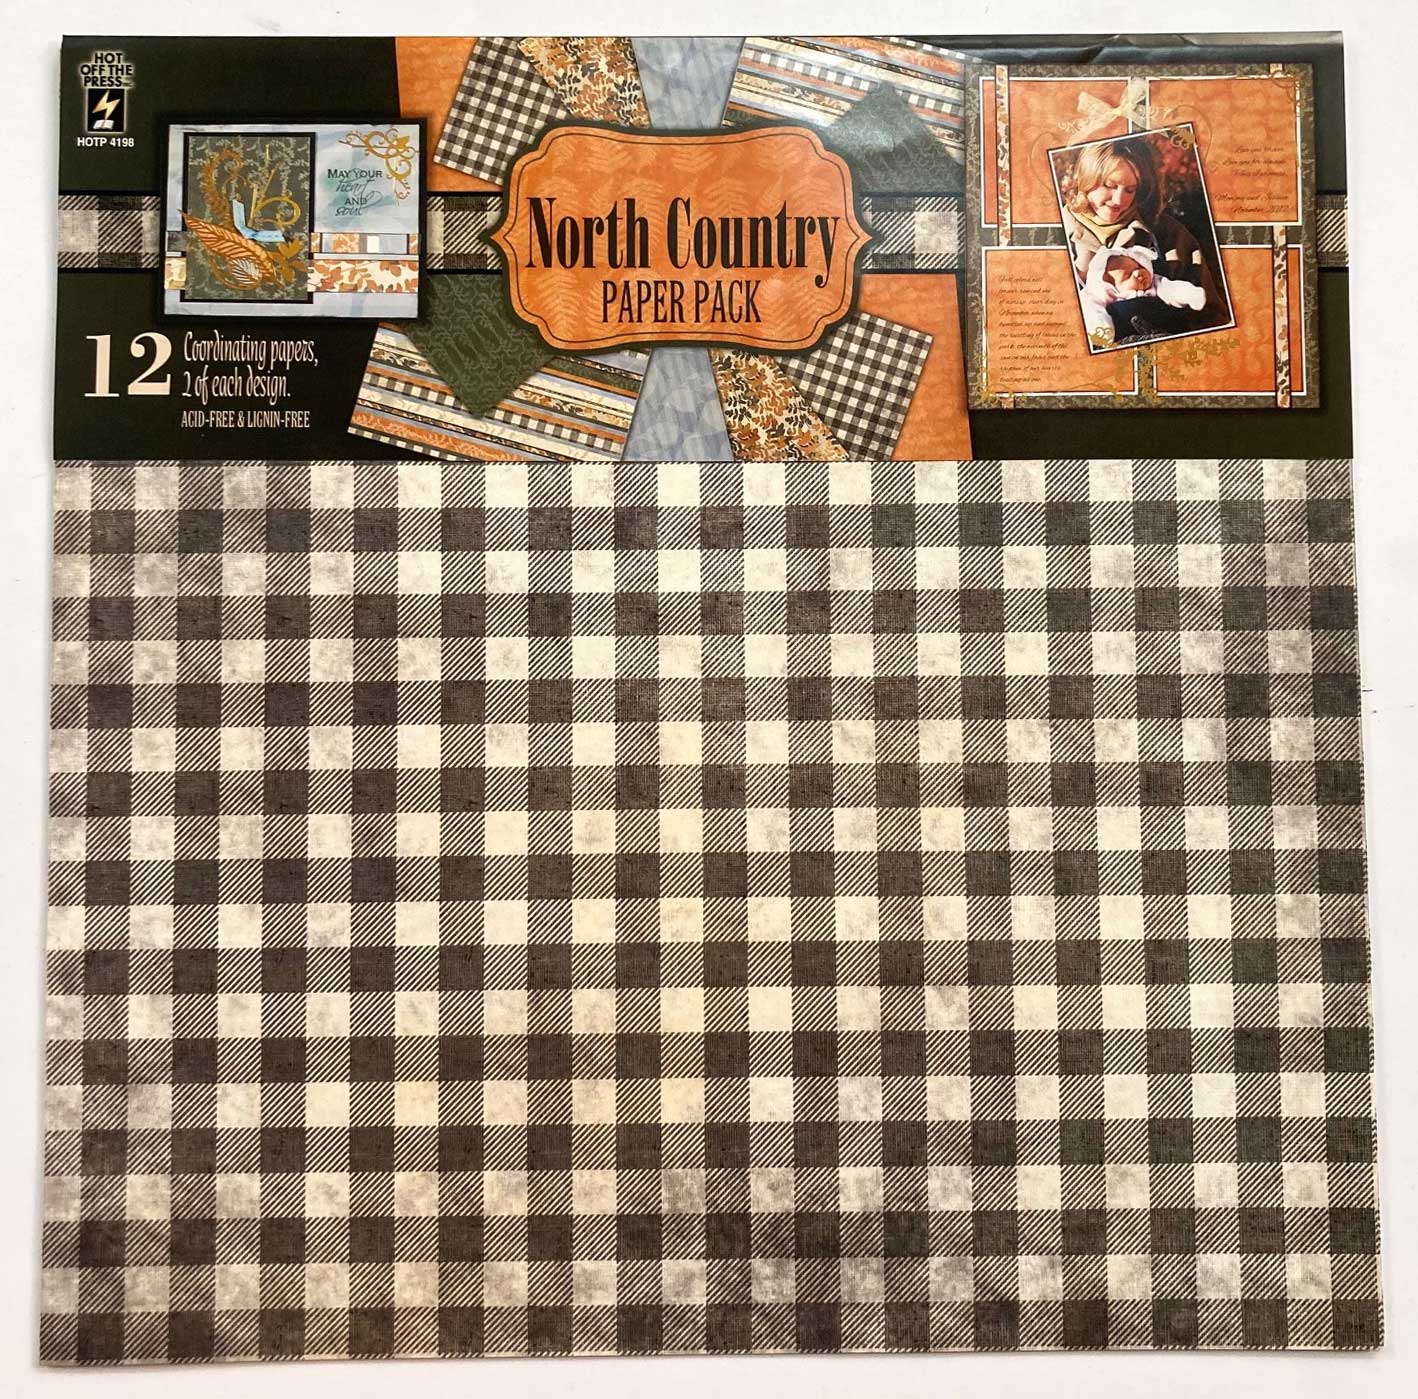 North Country Paper Pack